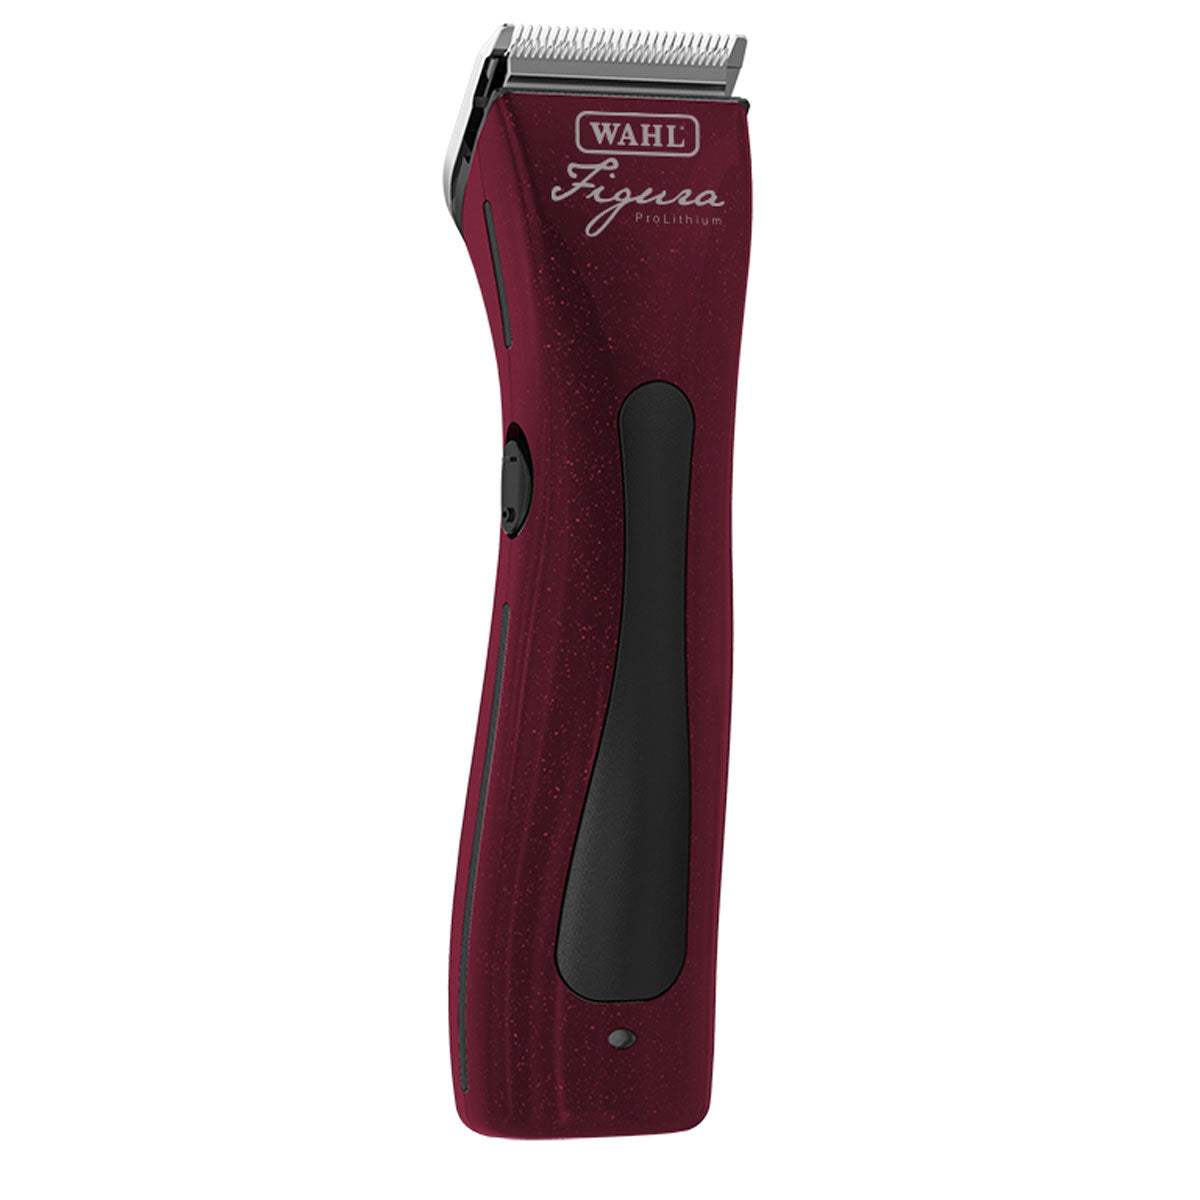 Wahl Figura Lithium Ion Cordless Clipper